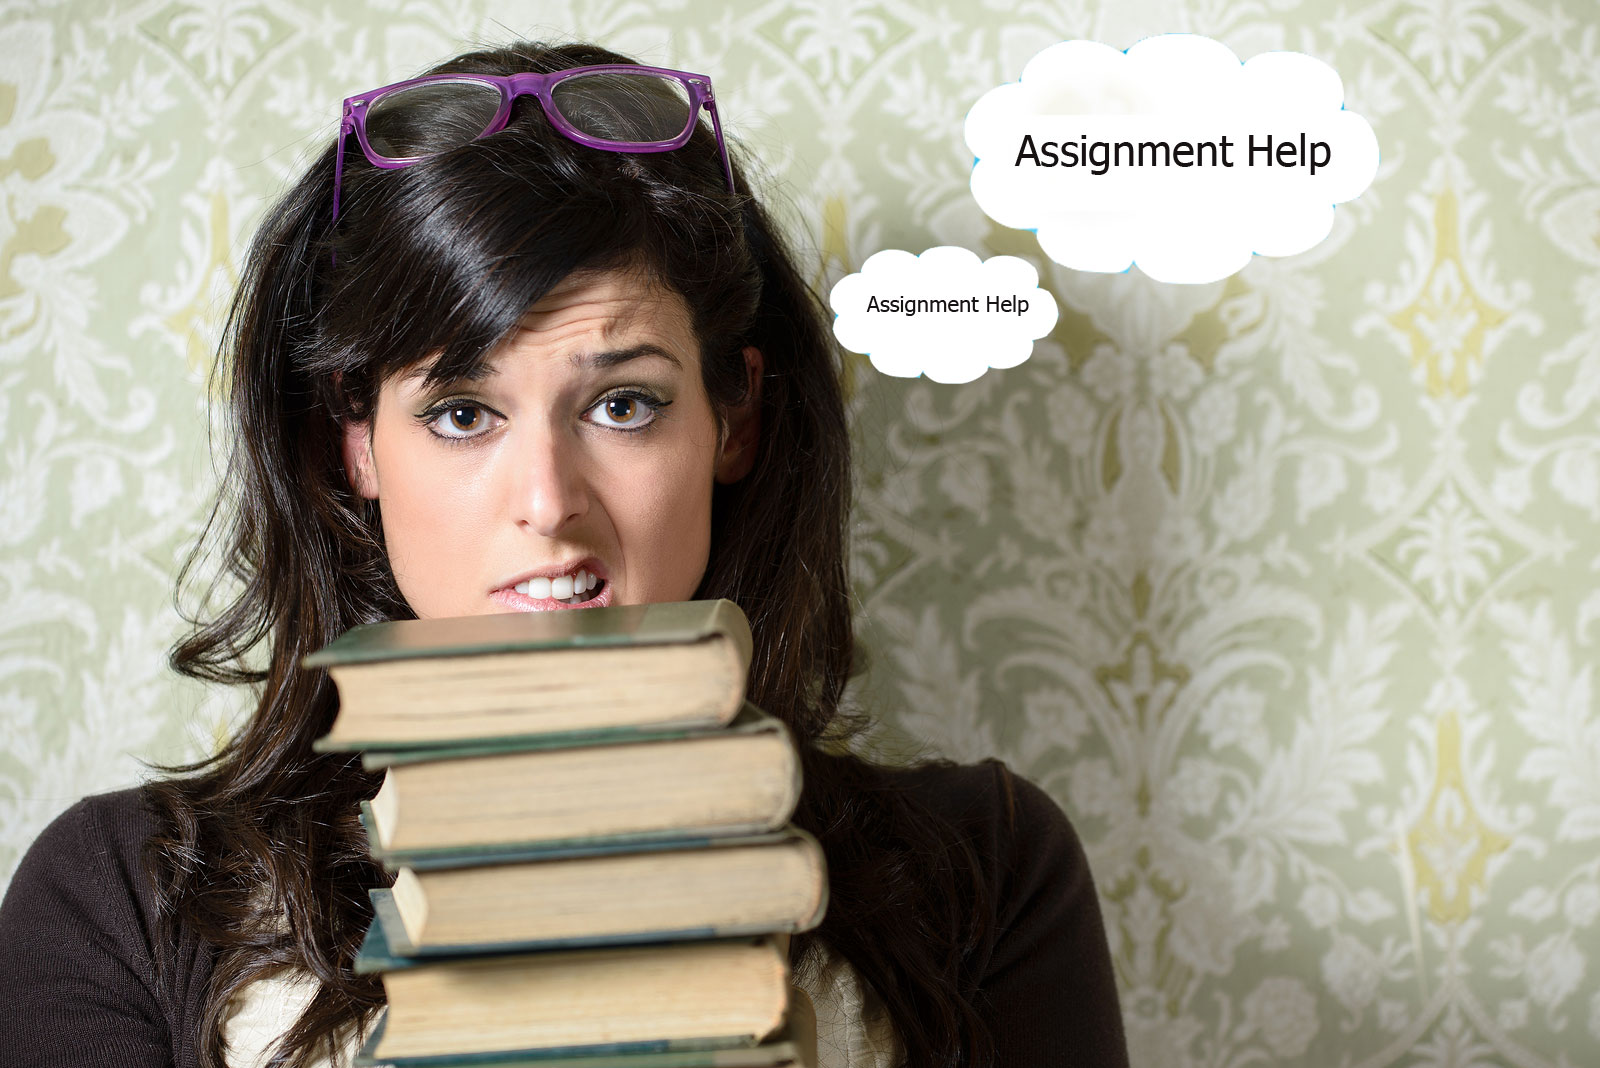 The Benefits of Online Assessment Help